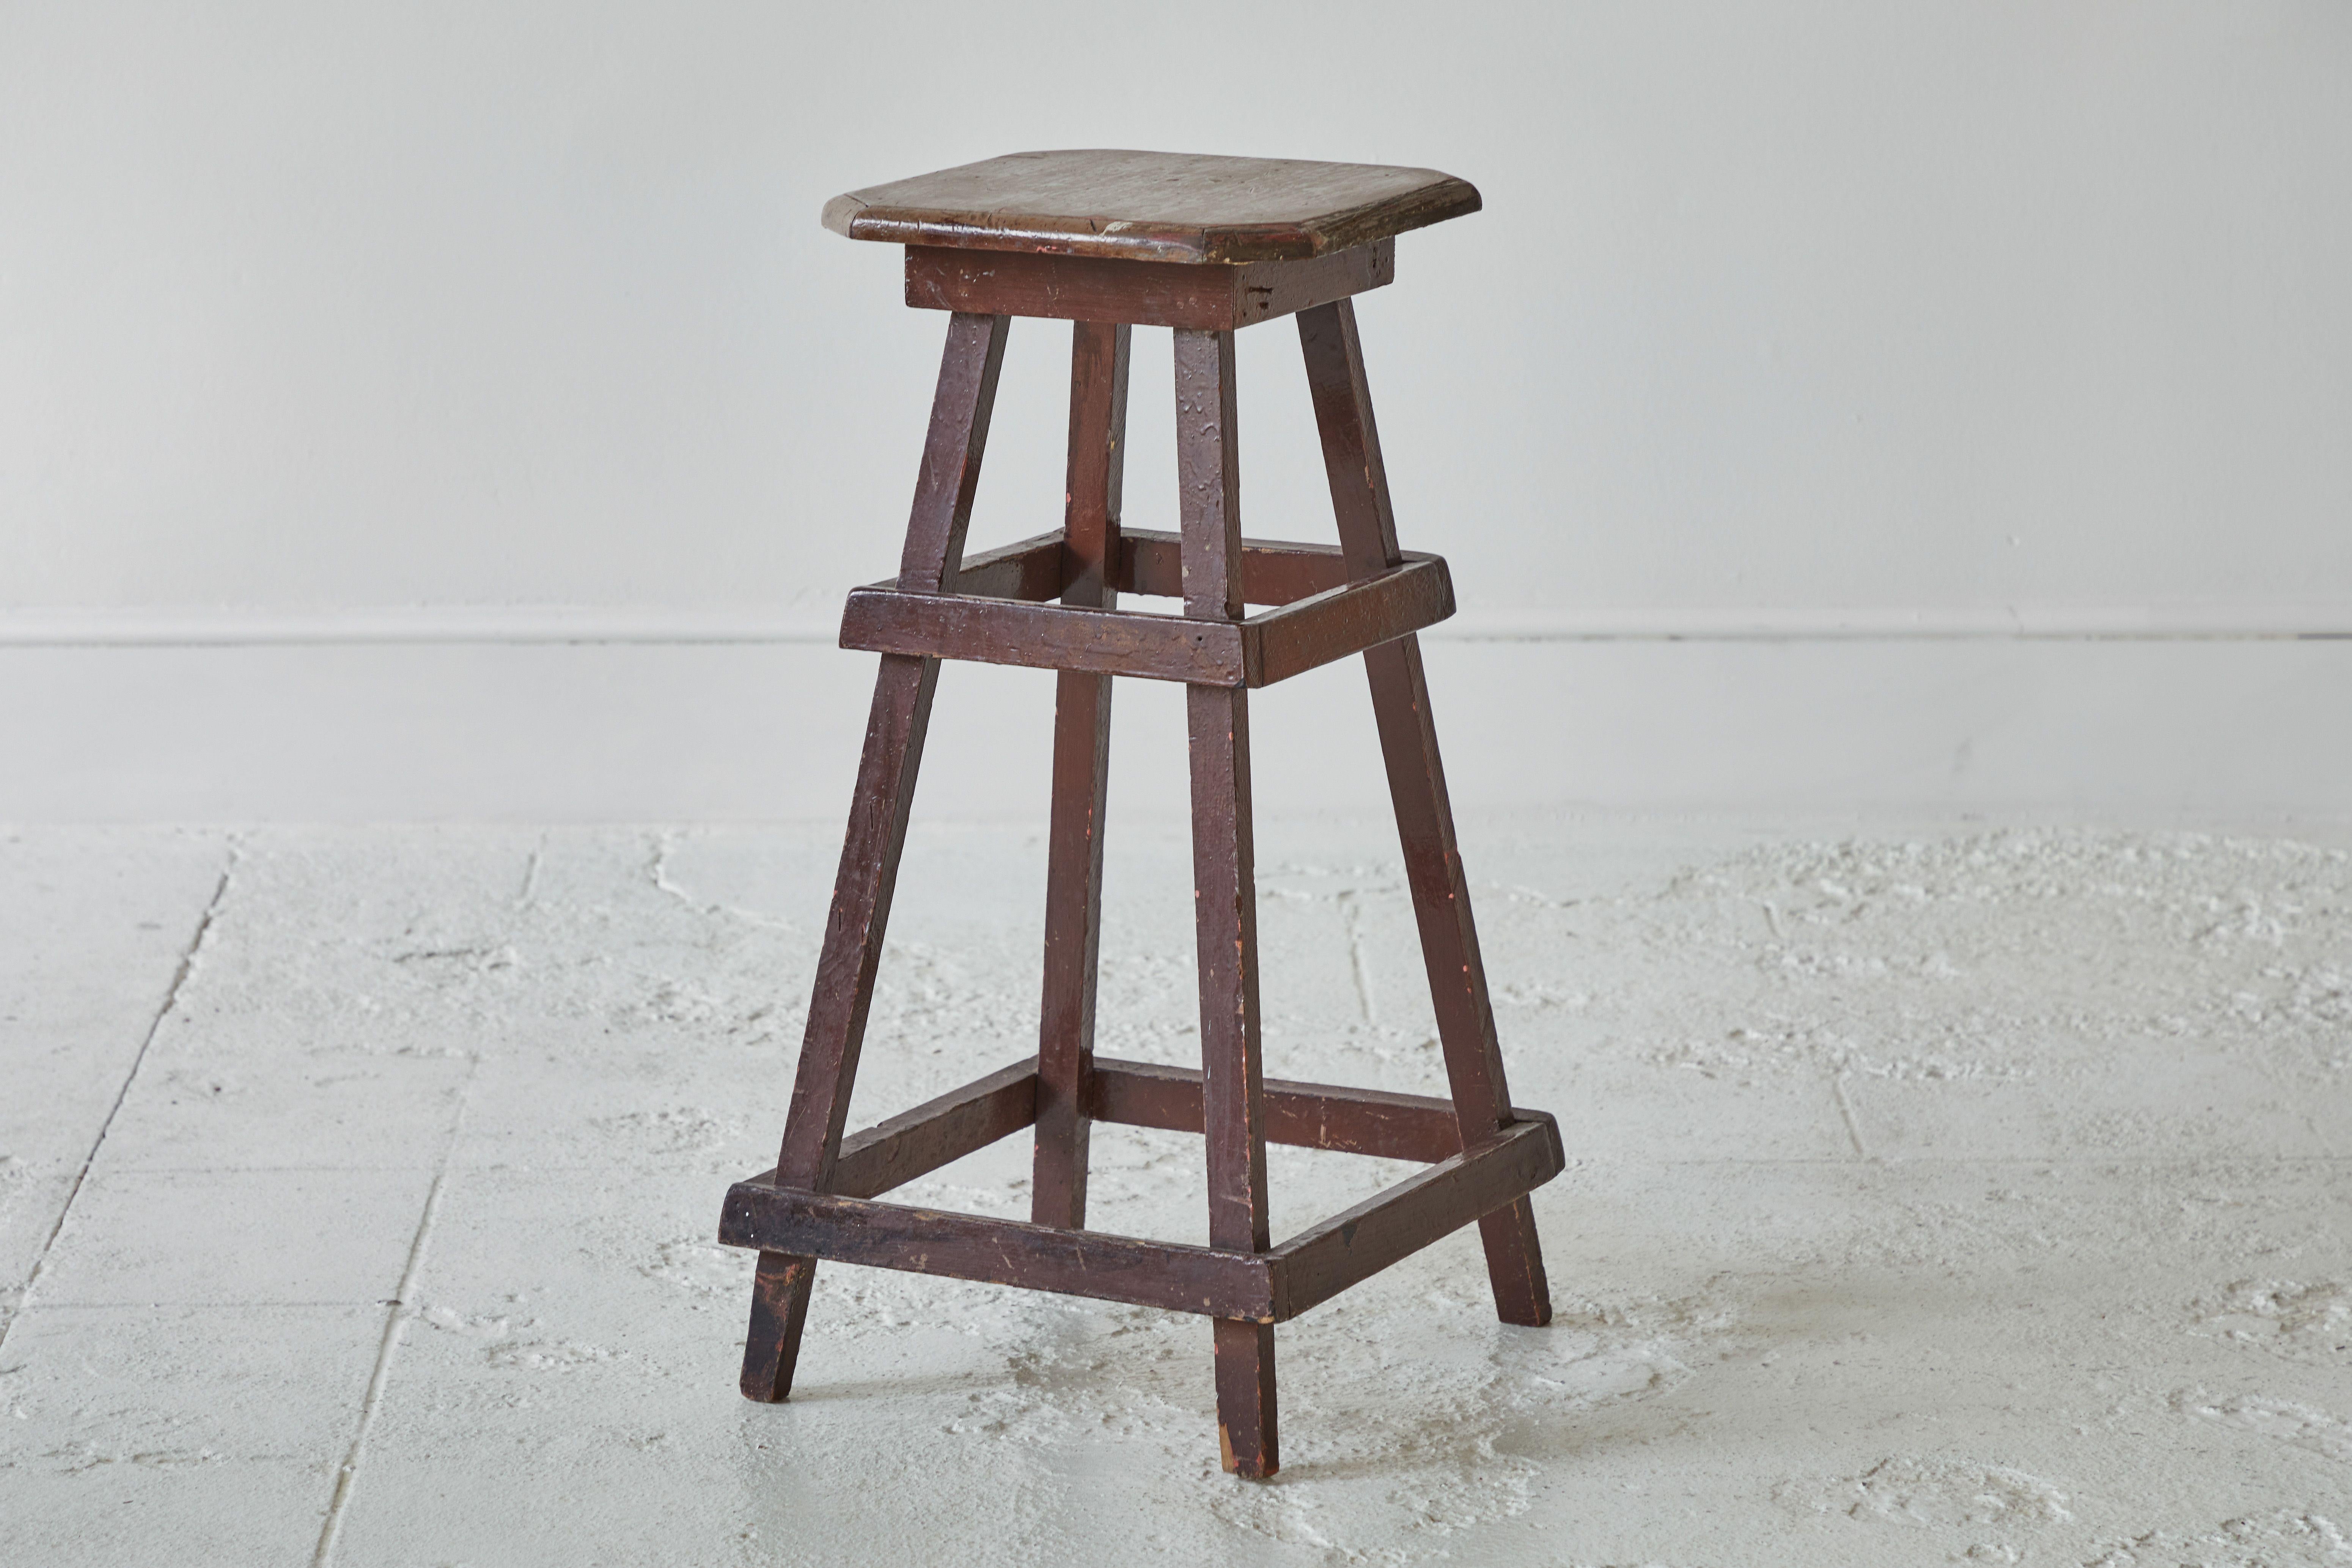 Wood Early American Rustic Squared Stool